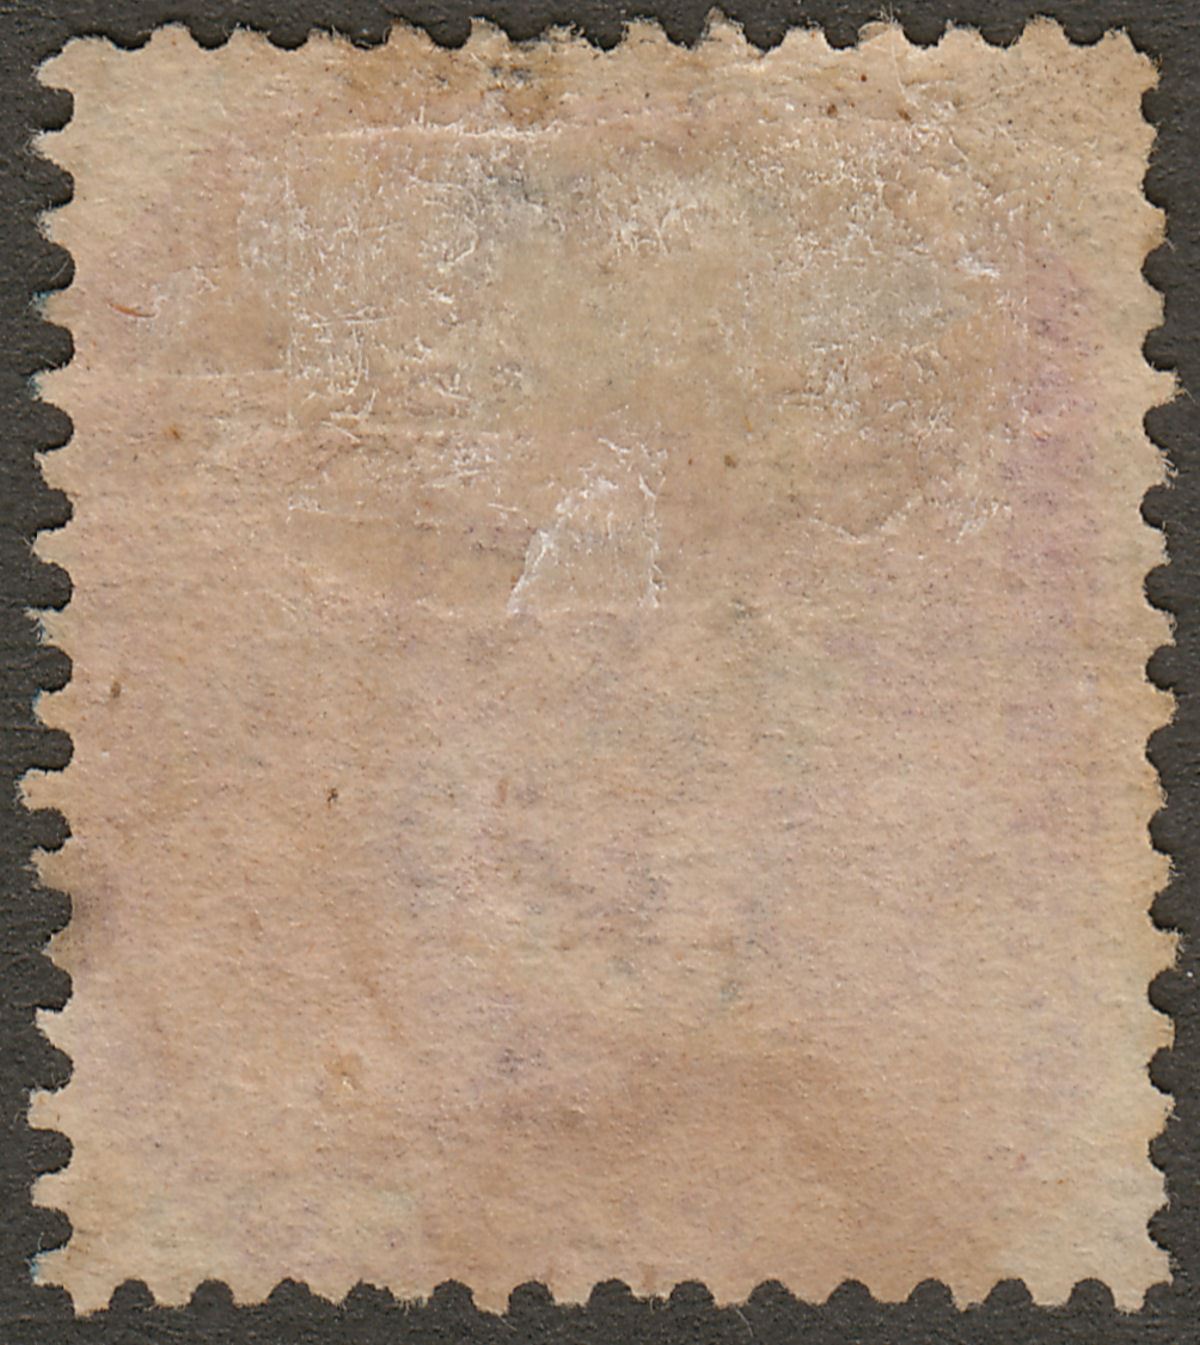 India used Aden 1873? QV 9p Used blue ADEN-CANTONMENT 124 Duplex Postmark KD7